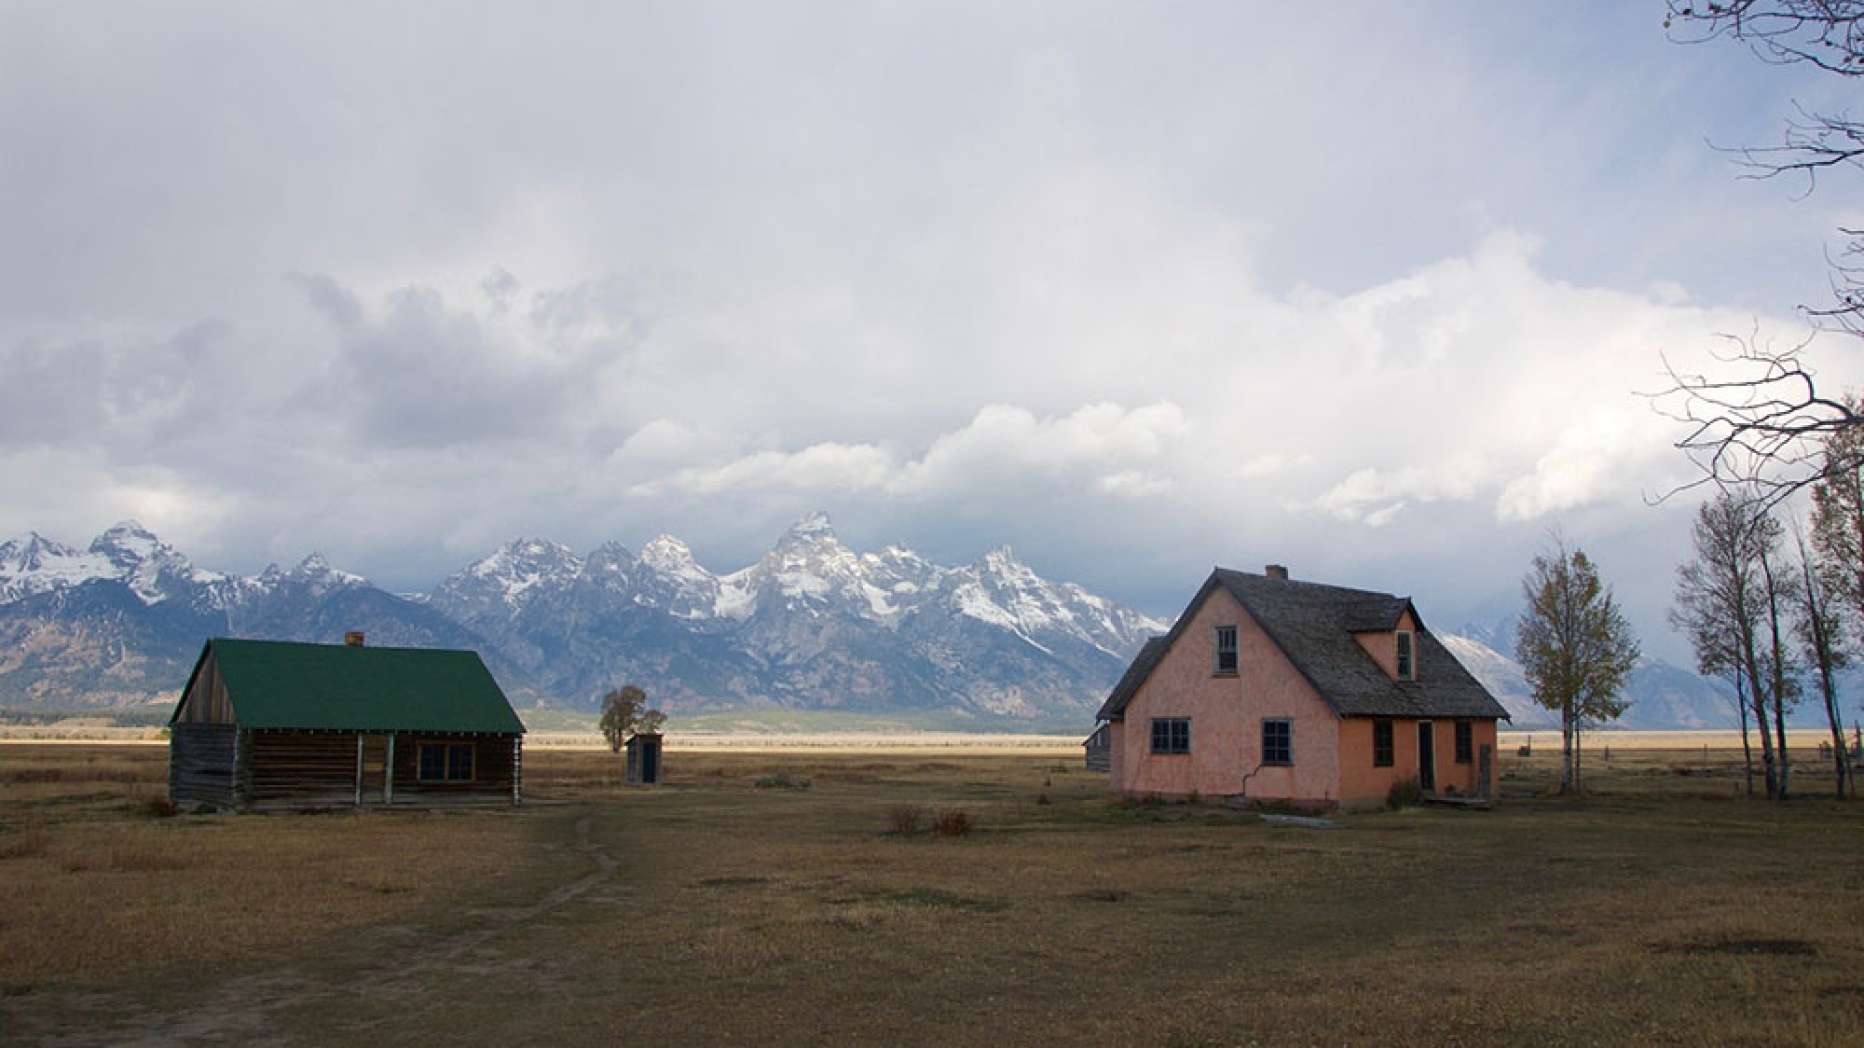 The Moulton homestead with mountains in the background